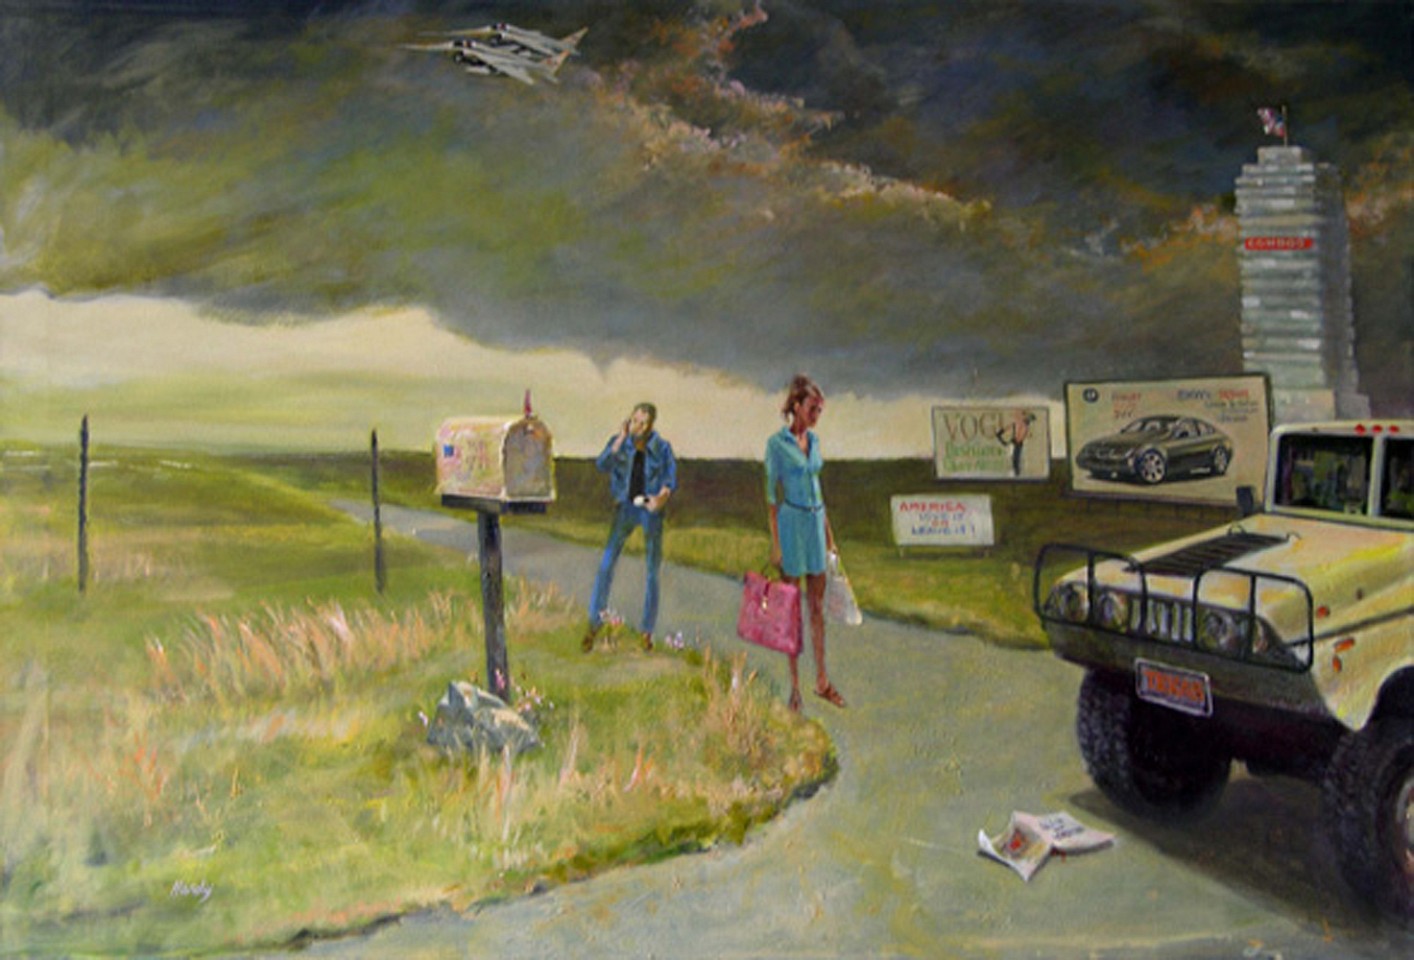 John Hardy, America - Love It or Leave It, 2005
Oil on Canvas, 40 x 59 inches
HARD0014